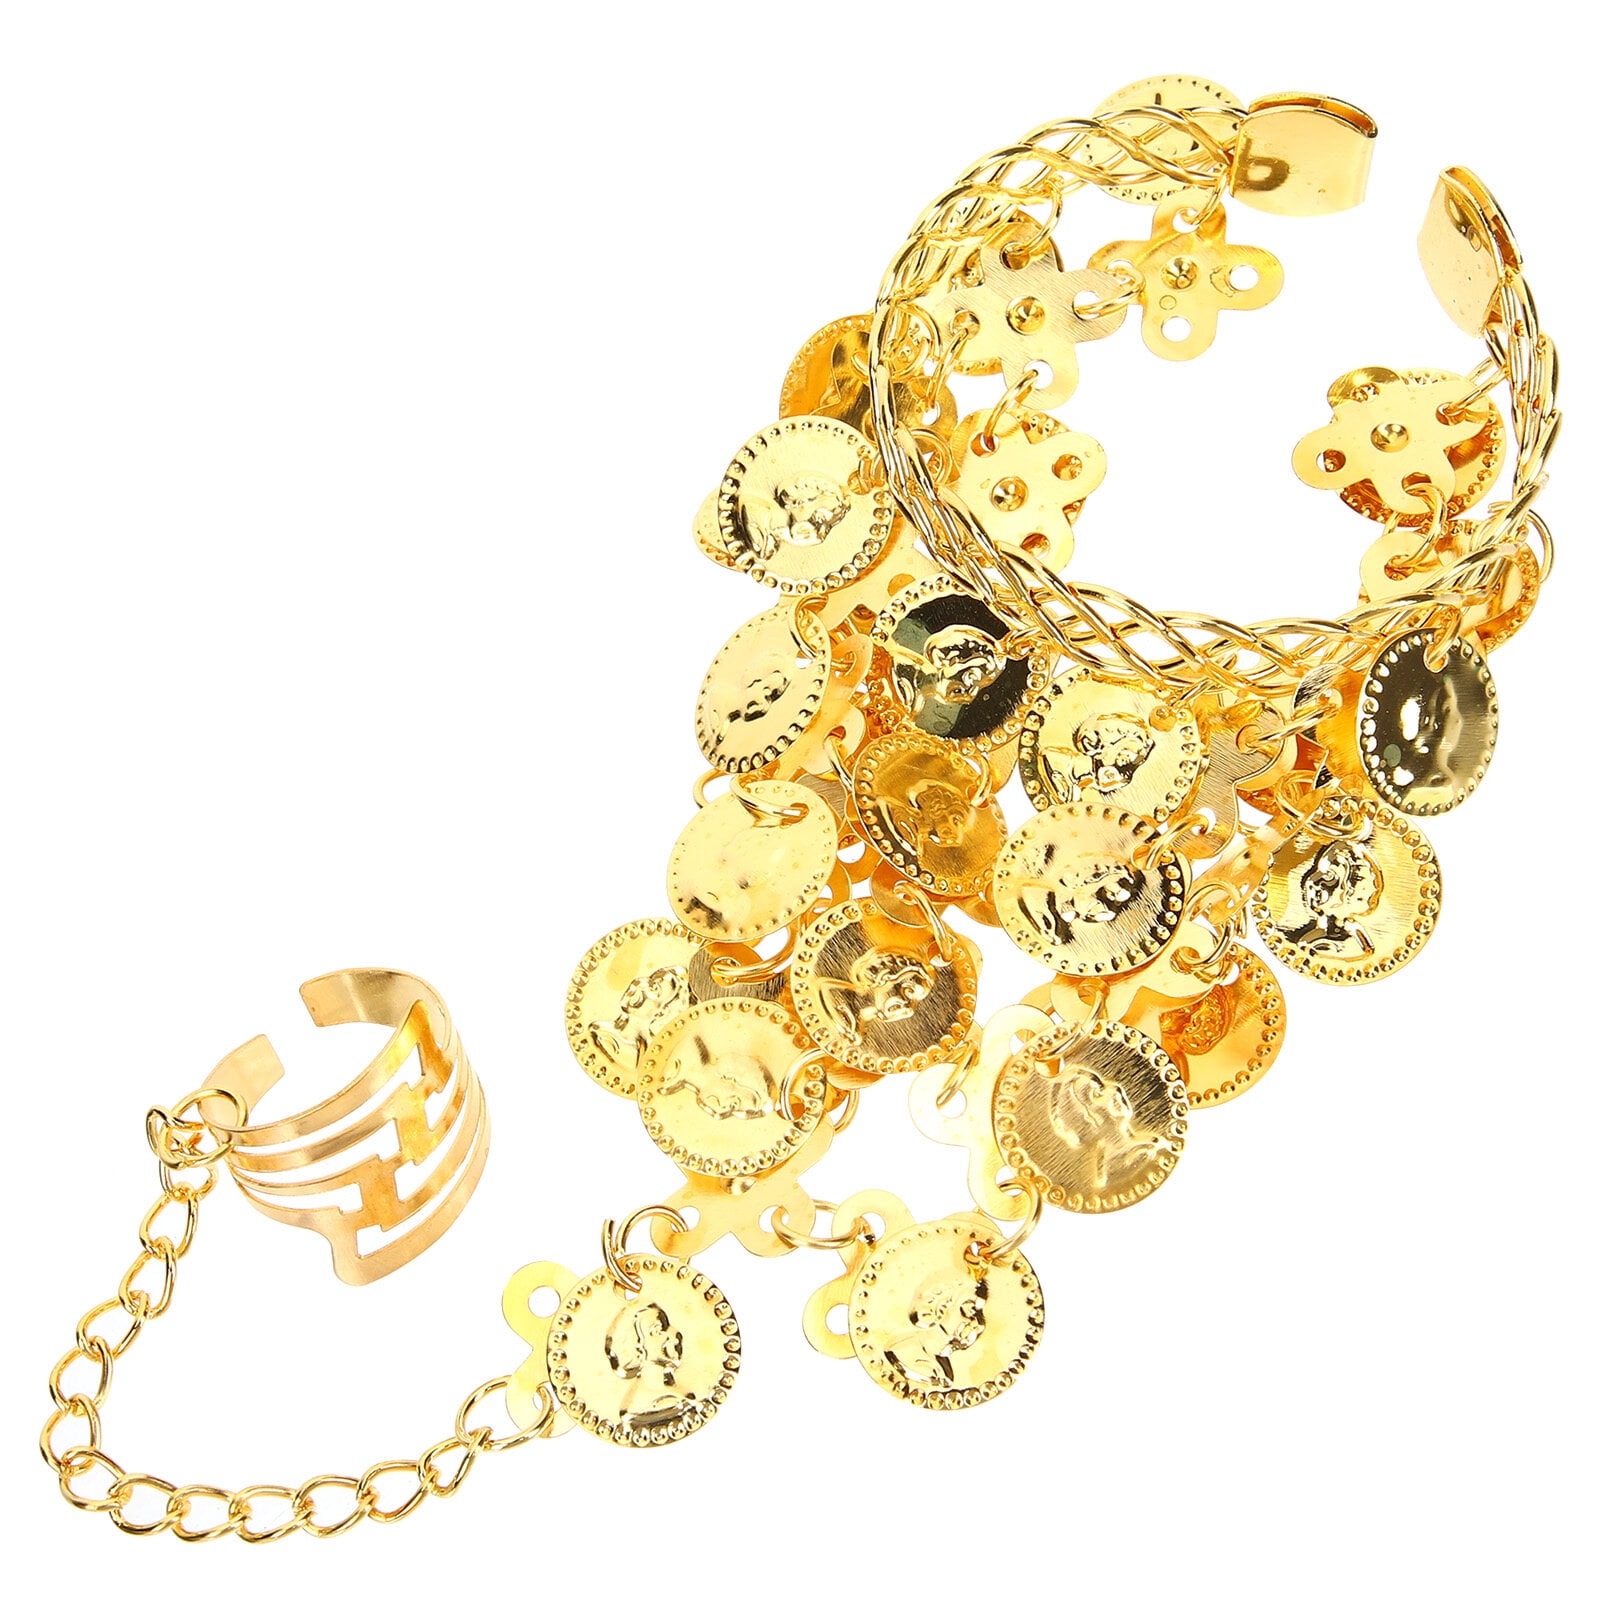 Gold Coin Coin Bangles Gold For Babies Elegant Arab And Middle Eastern  Jewelry, Perfect African Gift For Boys And Girls Q0719 From Sihuai05, $4.53  | DHgate.Com